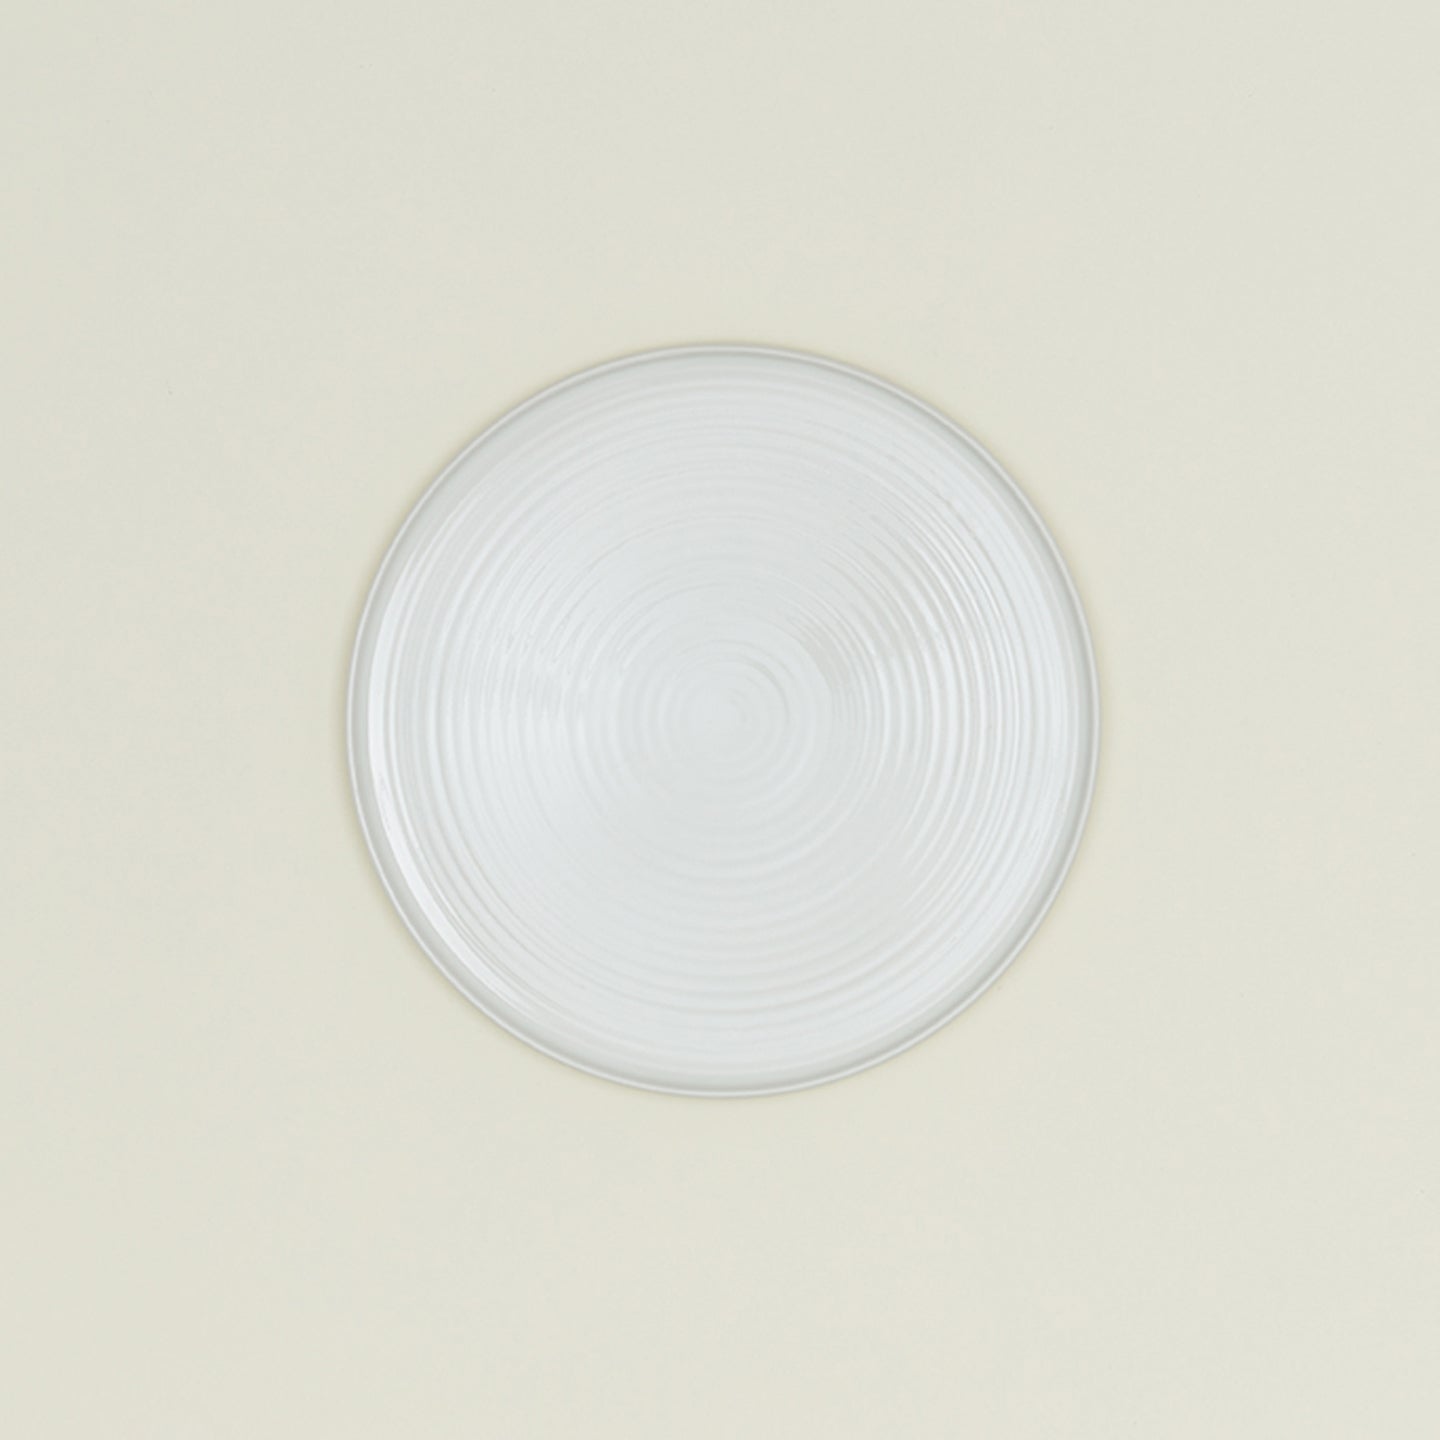 Minimalistic ceramic plate with a captivating concentric pattern design.